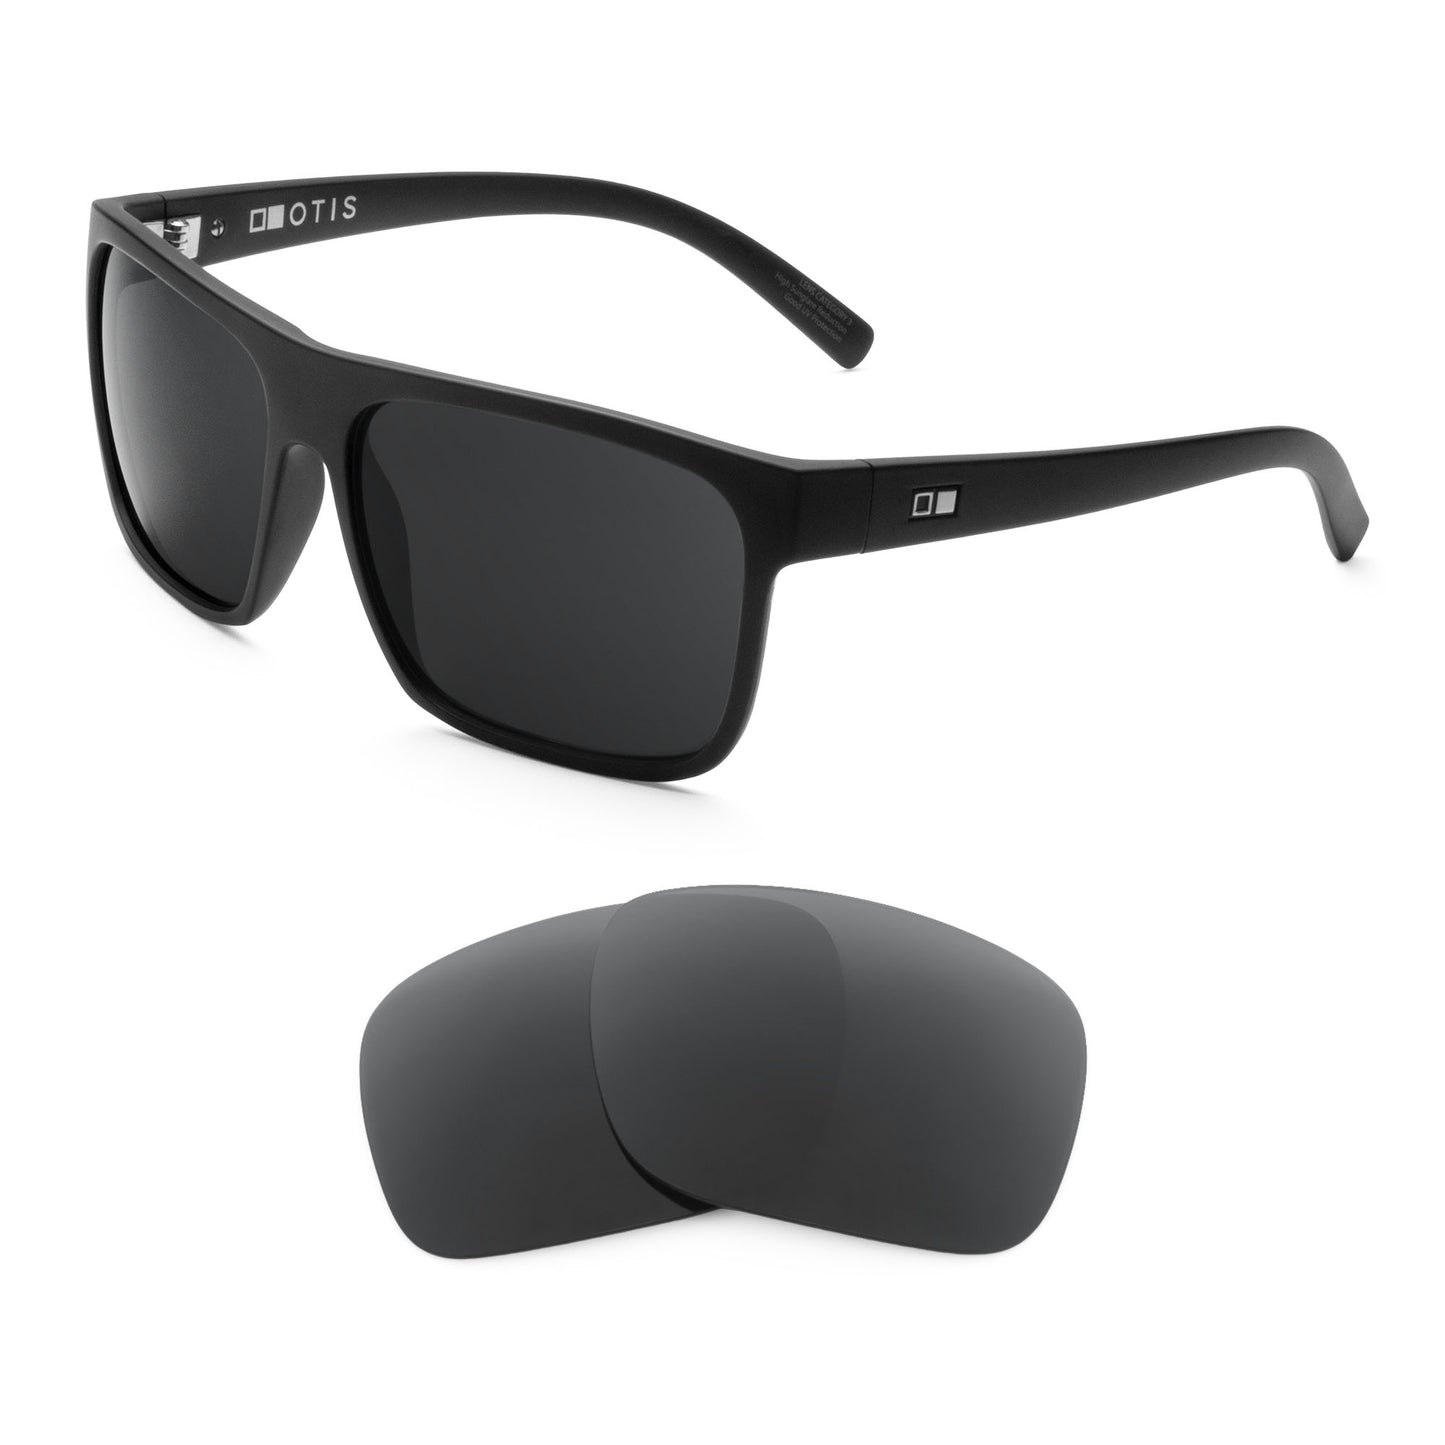 Otis After Dark sunglasses with replacement lenses